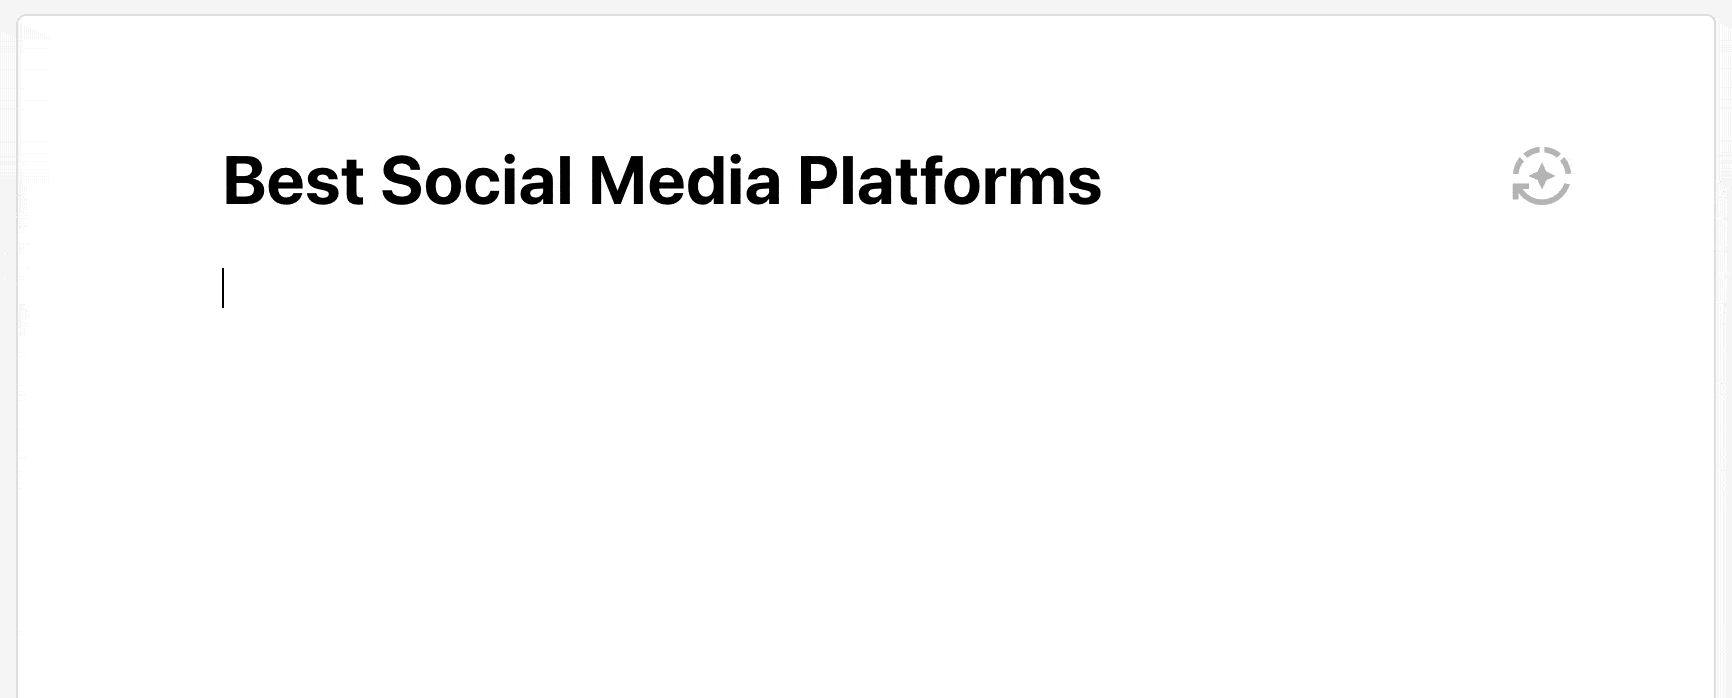 best social media platforms question answered using lex.page ai